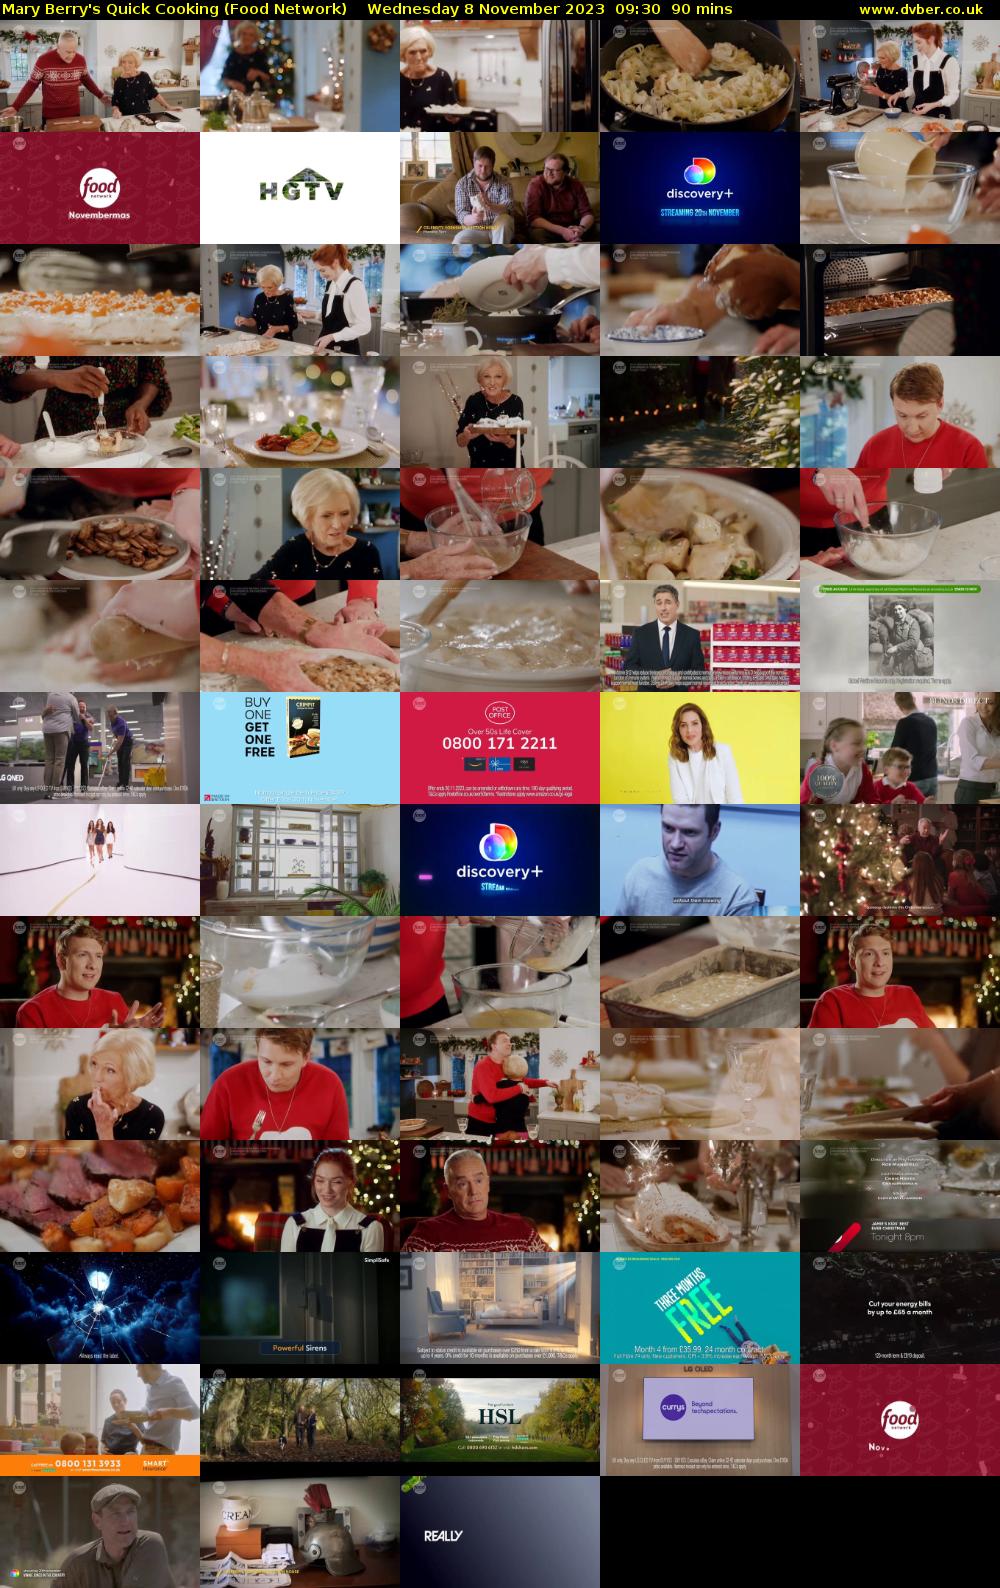 Mary Berry's Quick Cooking (Food Network) Wednesday 8 November 2023 09:30 - 11:00